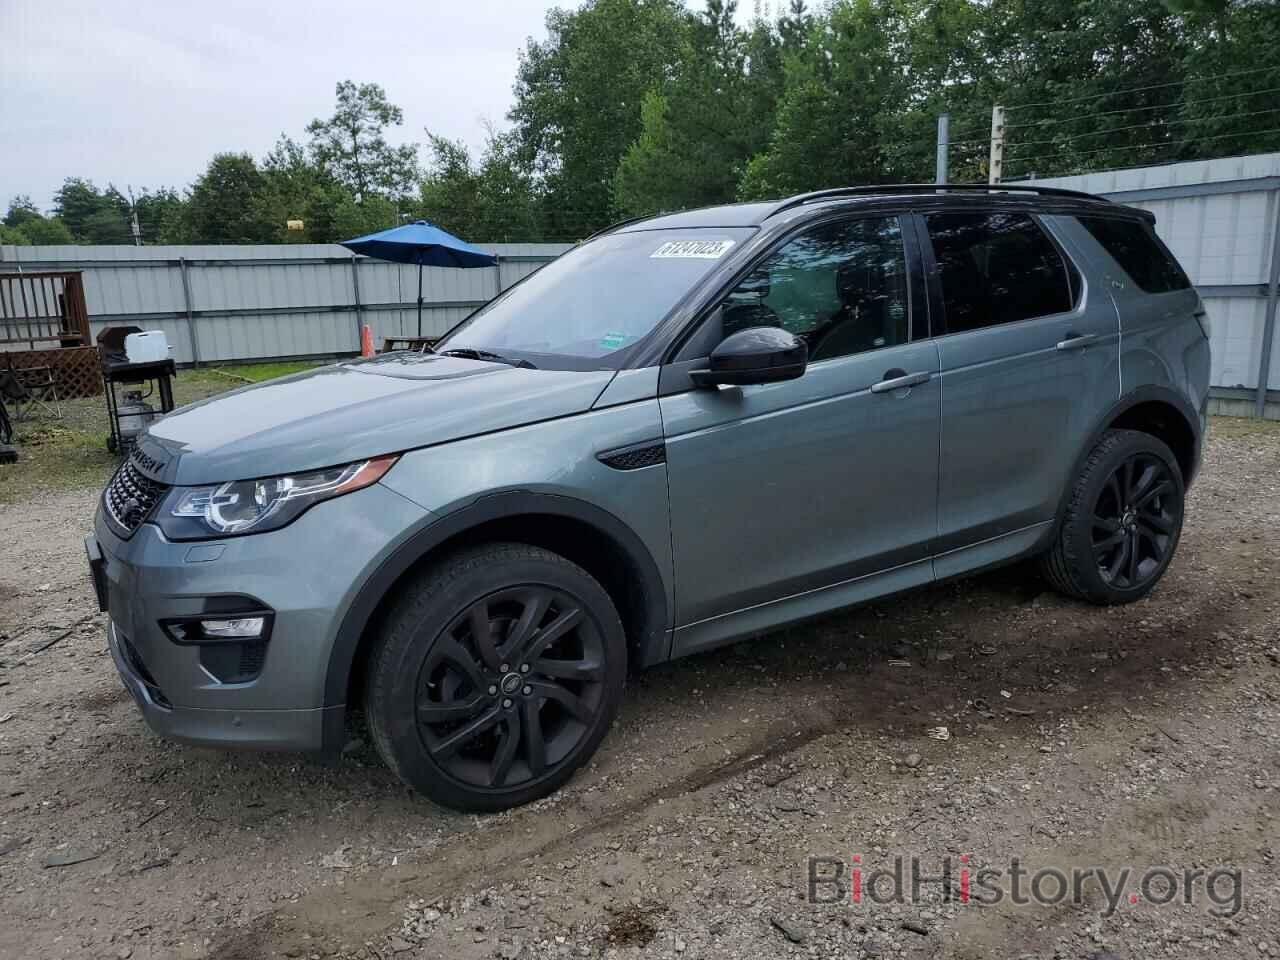 Фотография SALCT2RX9JH734888 - LAND ROVER DISCOVERY 2018